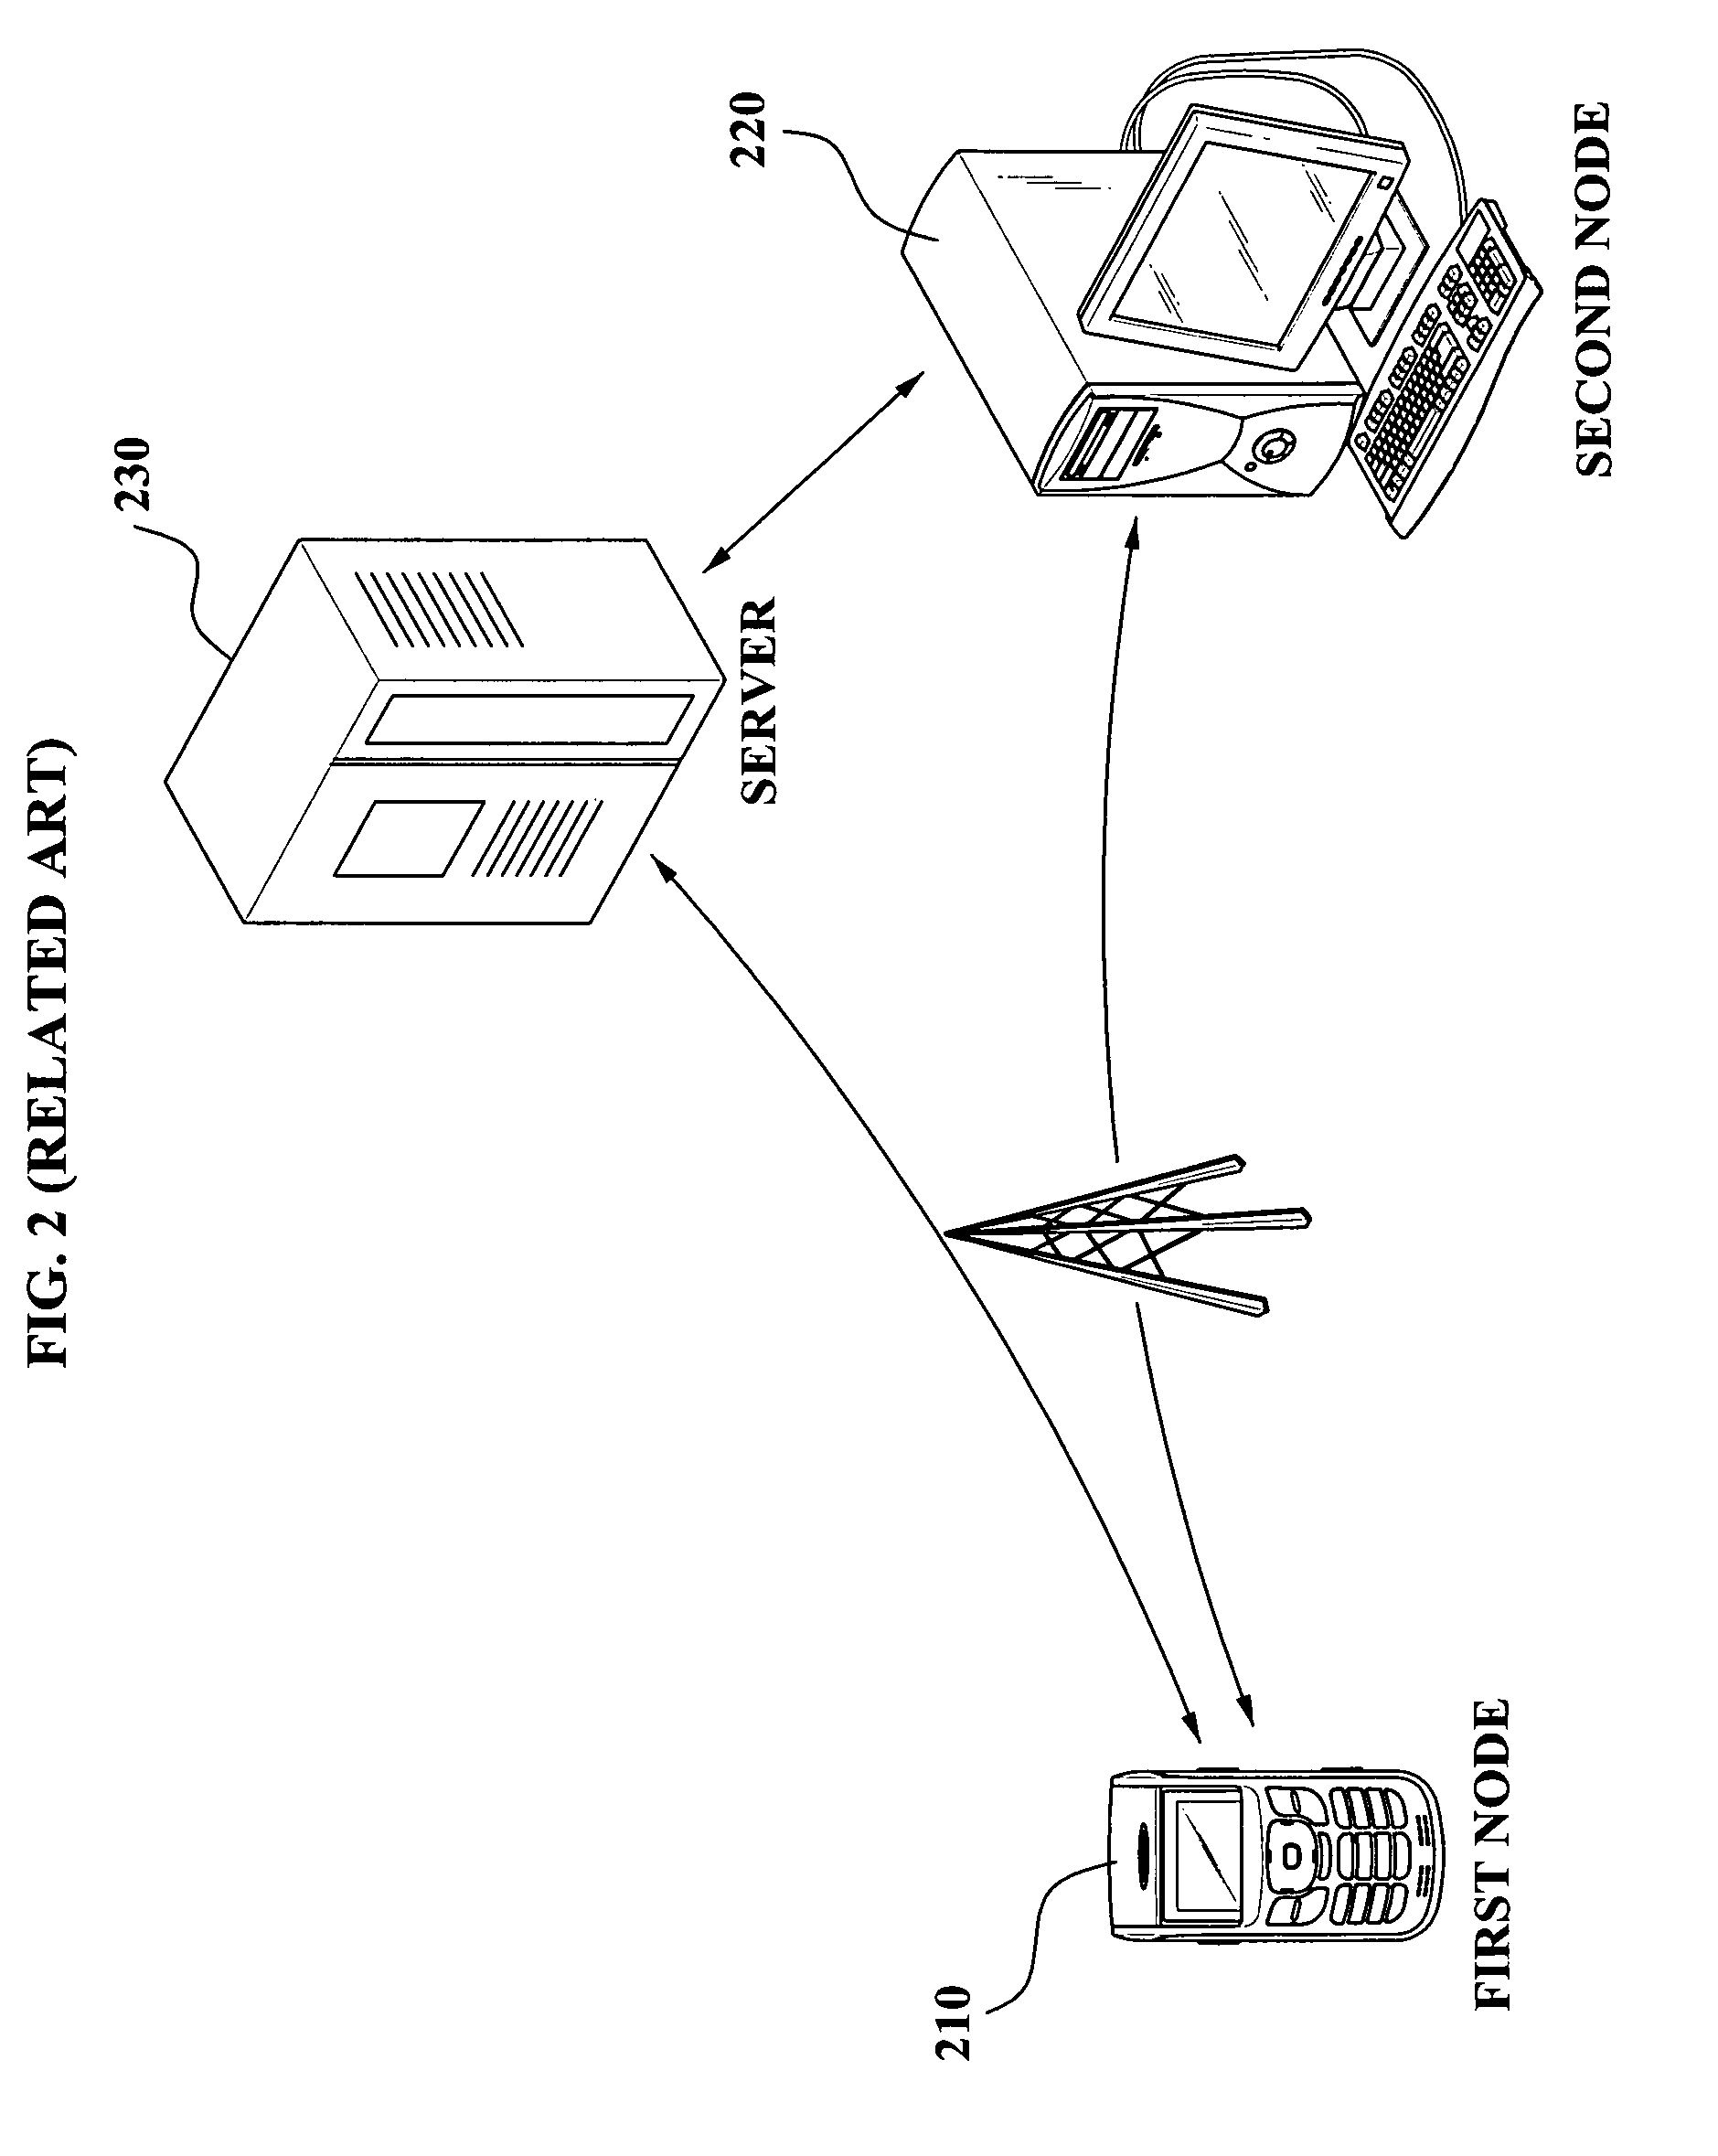 Proxying transaction method for processing function of wireless node in peer-to-peer overlay network